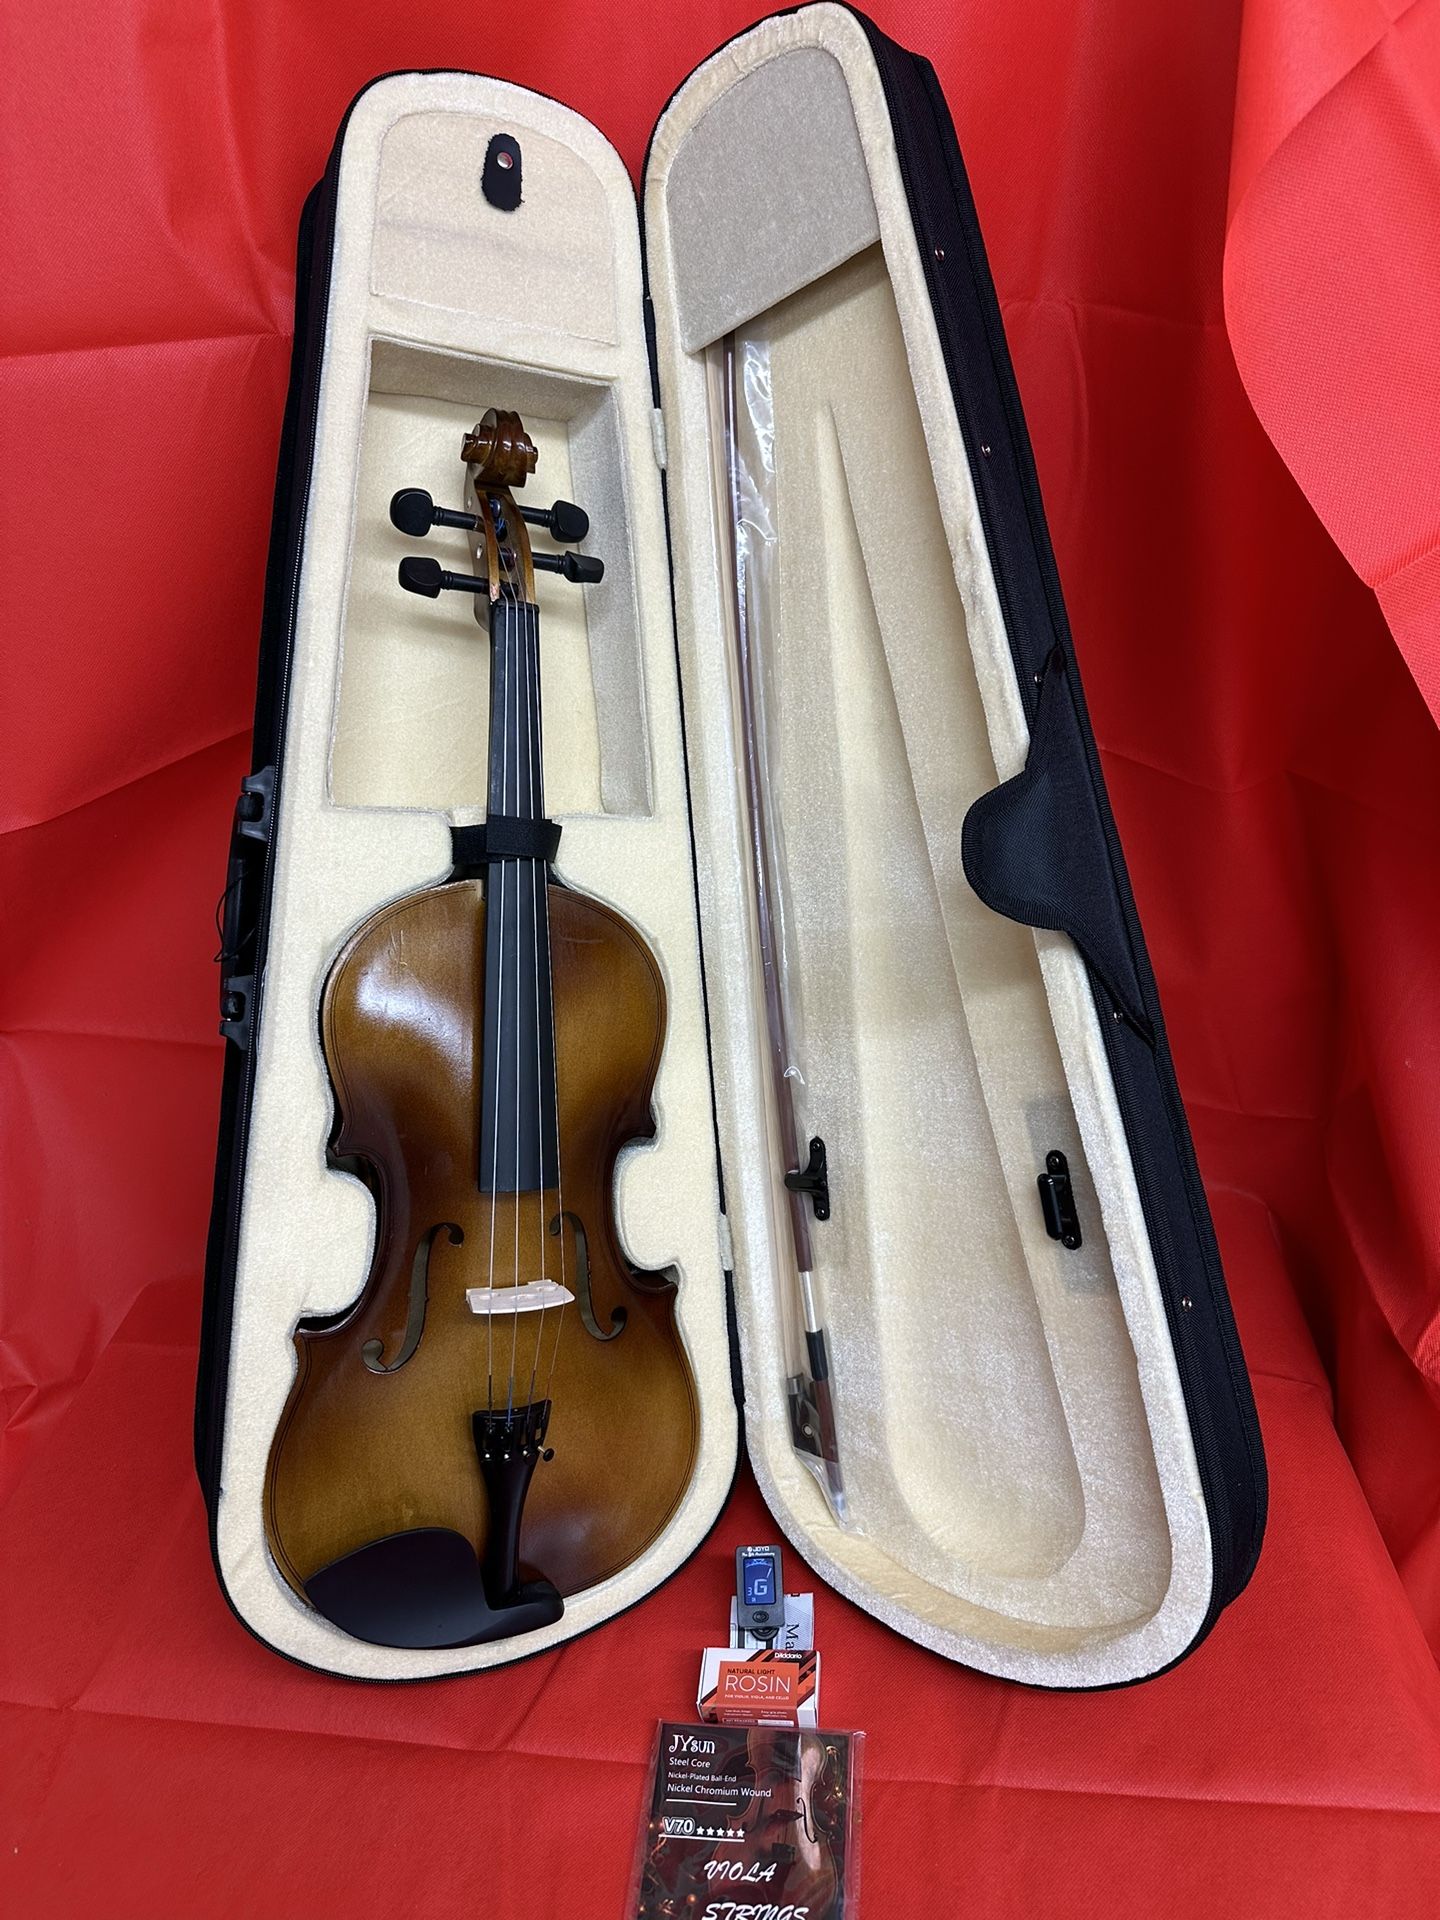 Beautiful 16 inch Viola with New Bow, Digital Tuner, Extra Strings, Rosin $180 Firm